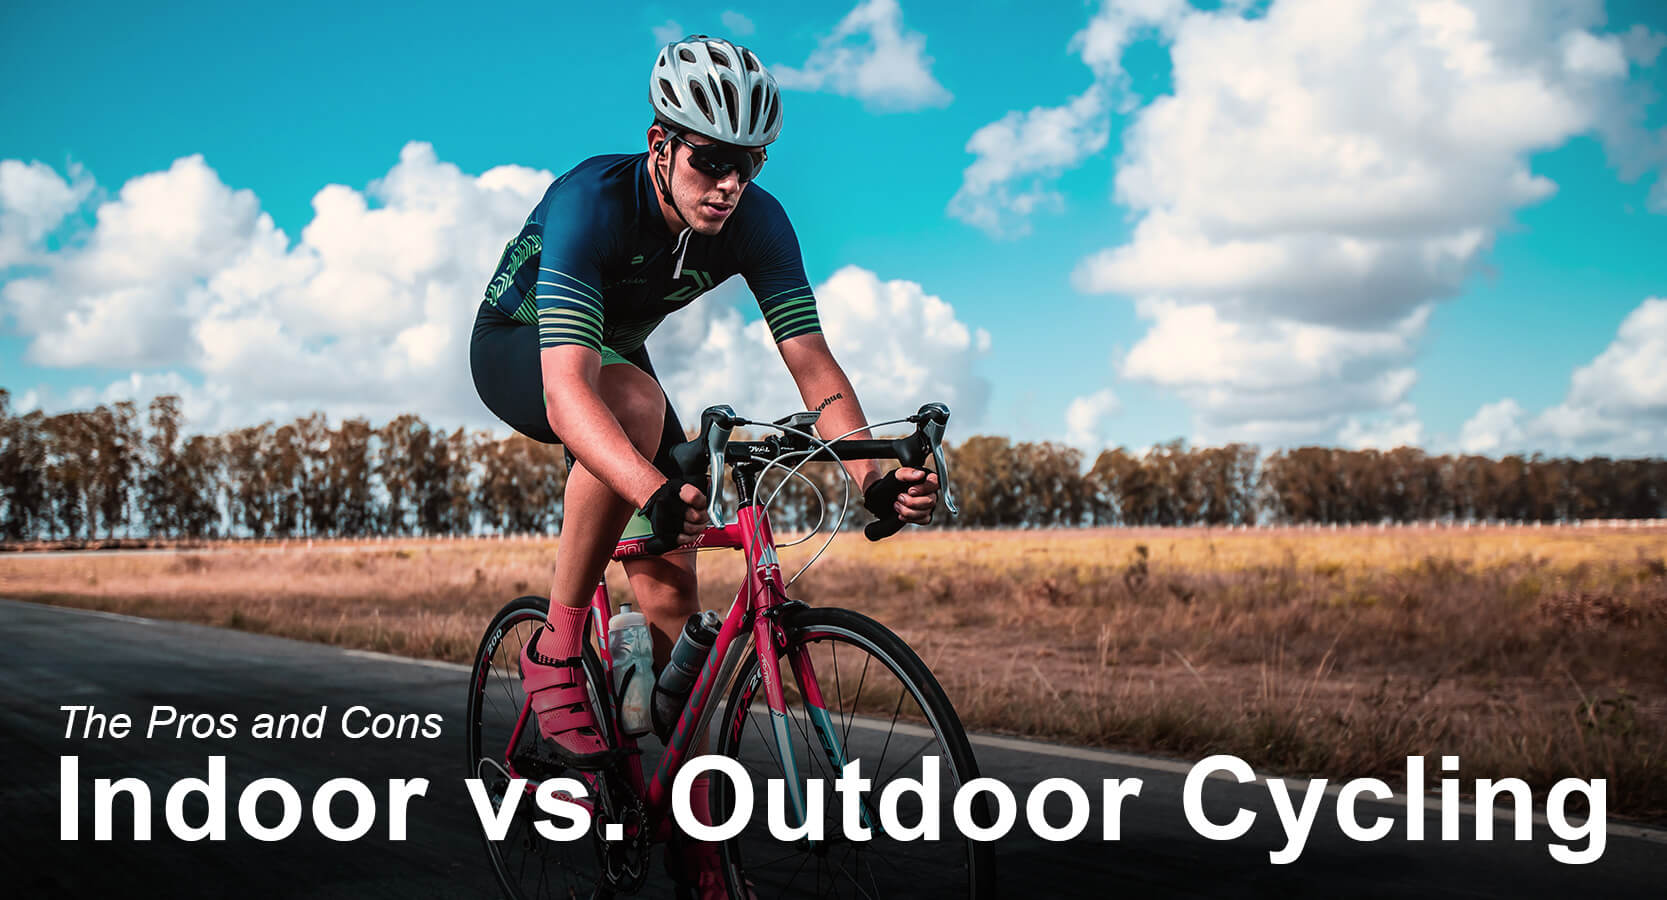 You are currently viewing The Pros and Cons of Indoor vs Outdoor Cycling